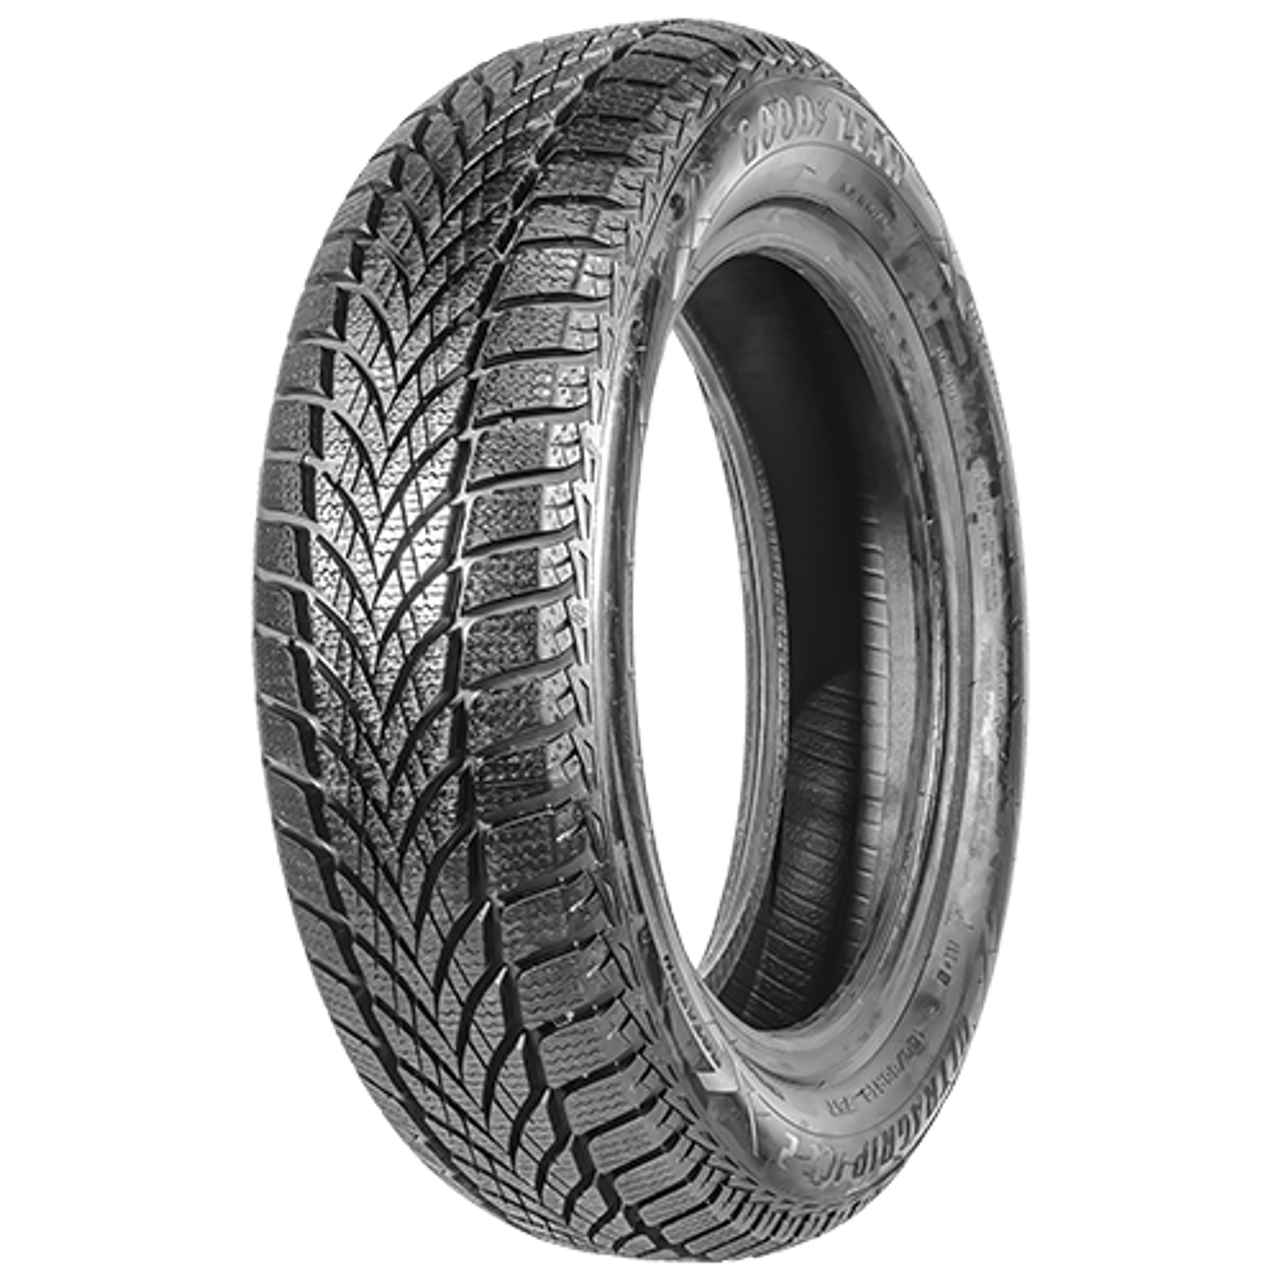 GOODYEAR ULTRAGRIP ICE 2 215/50R17 95T NORDIC COMPOUND BSW